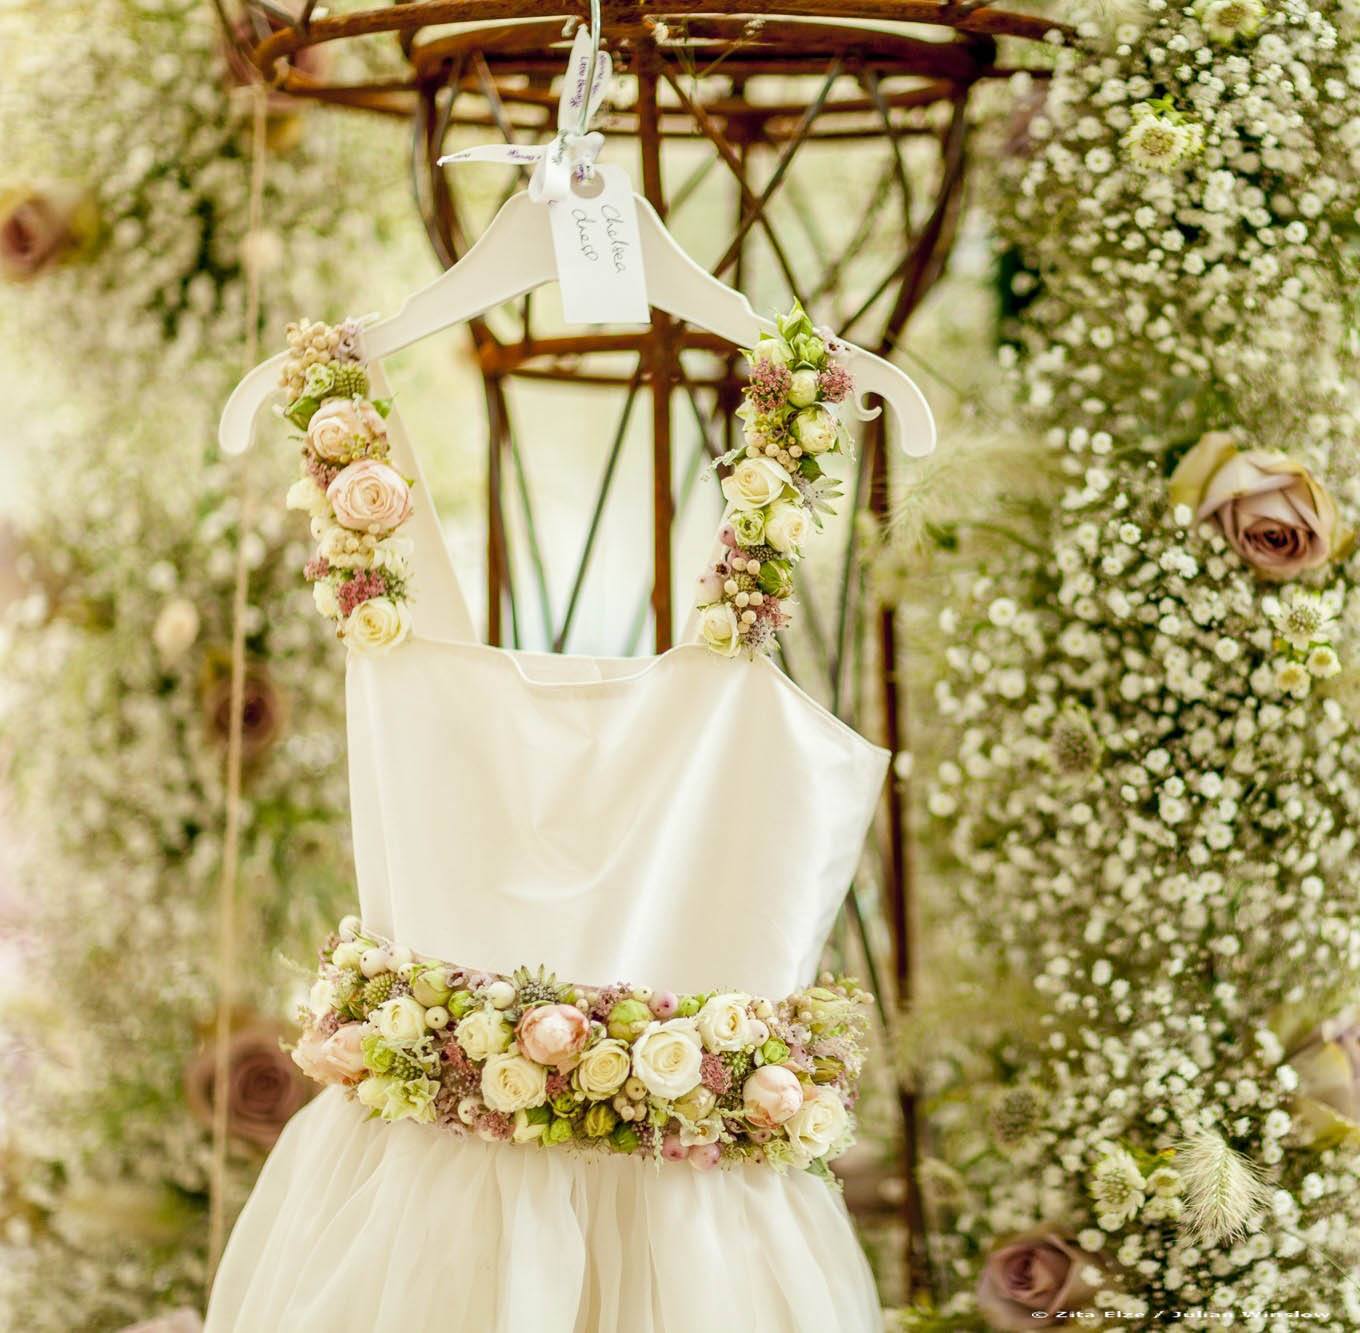 detail of a white dress with a belt and shoulder straps made with flowers and flowers in the background